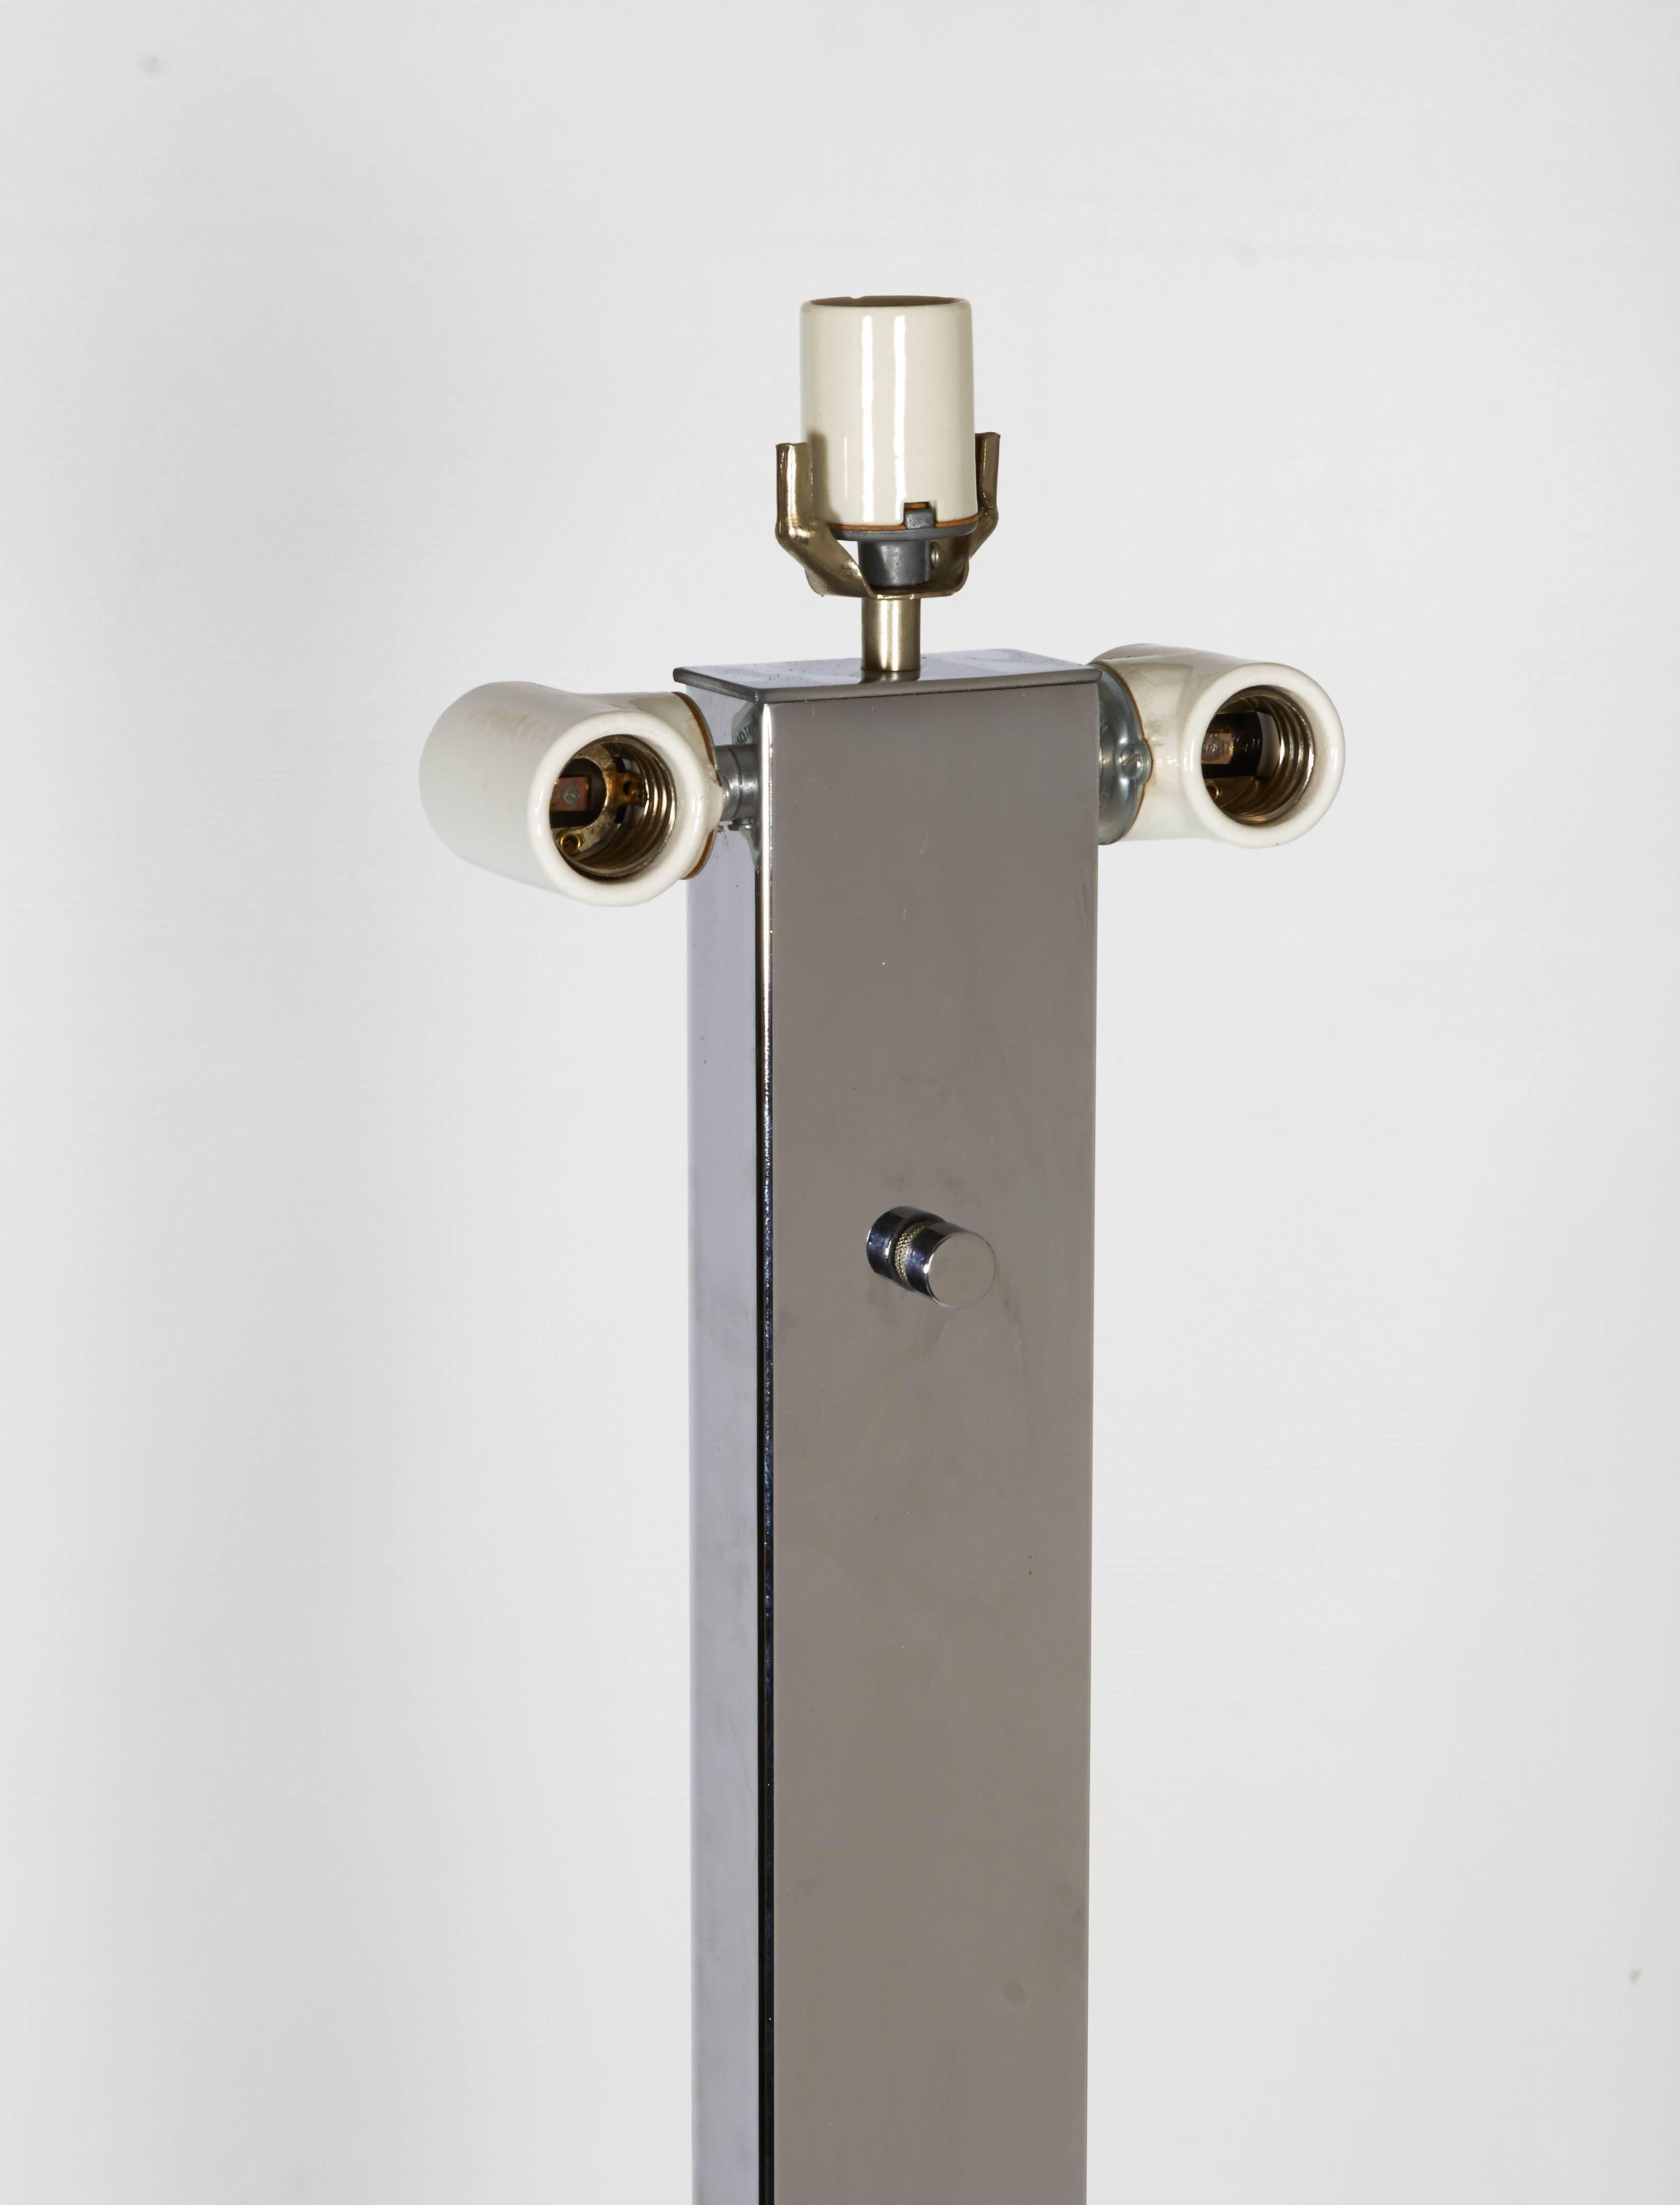 American Chrome Tower Lamp by Milo Baughman for George Kovacs